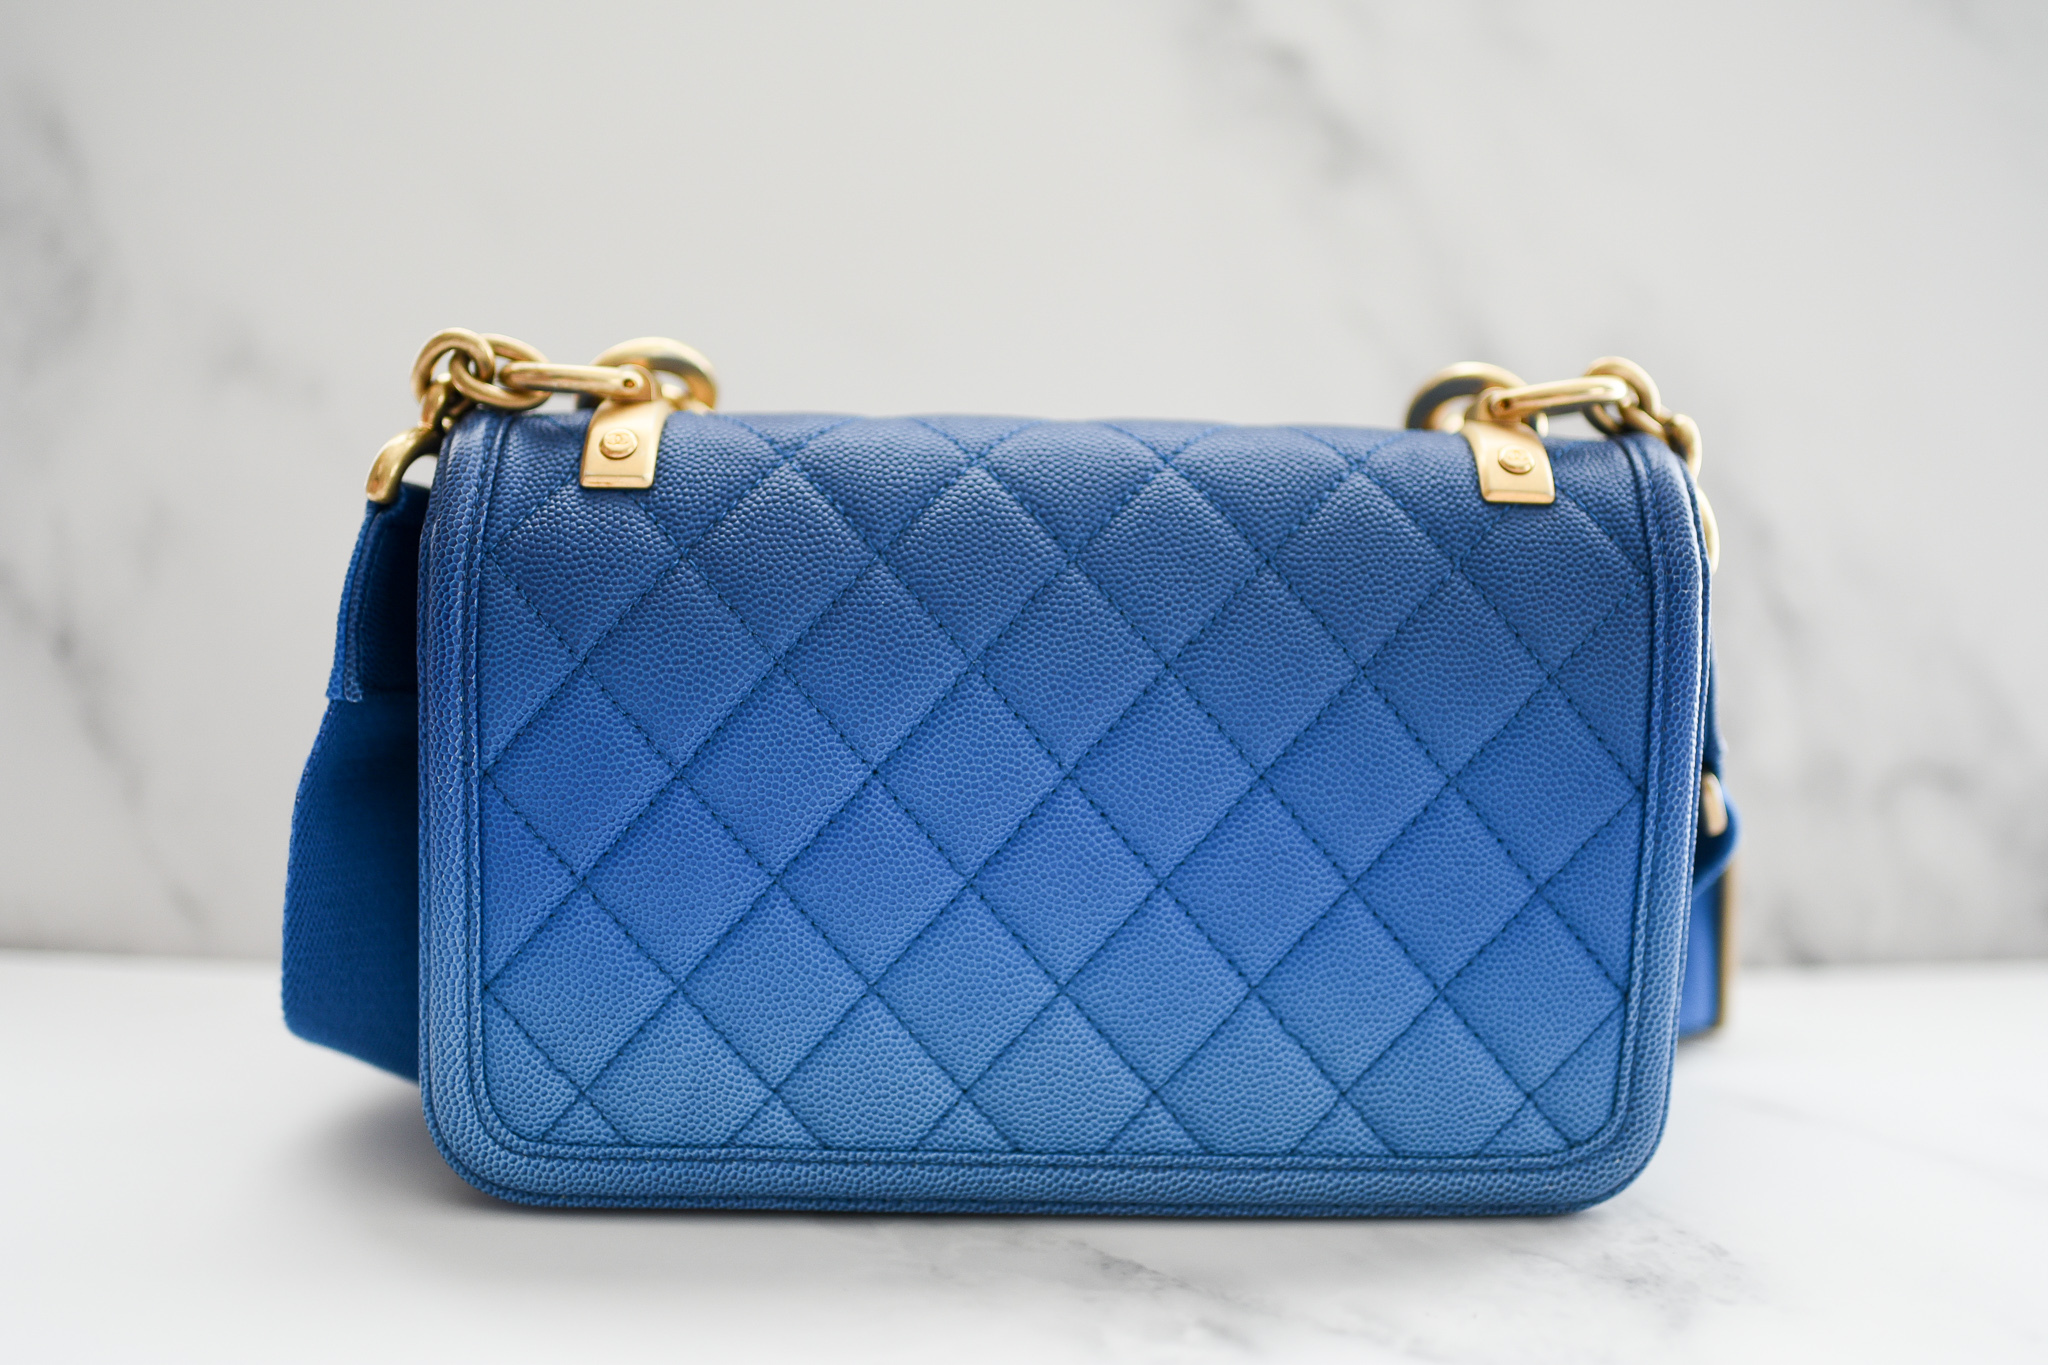 Chanel Sunset by the Sea Bag, Blue Ombre Caviar with Gold Hardware, Mini,  Preowned in Dustbag GA002 - Julia Rose Boston